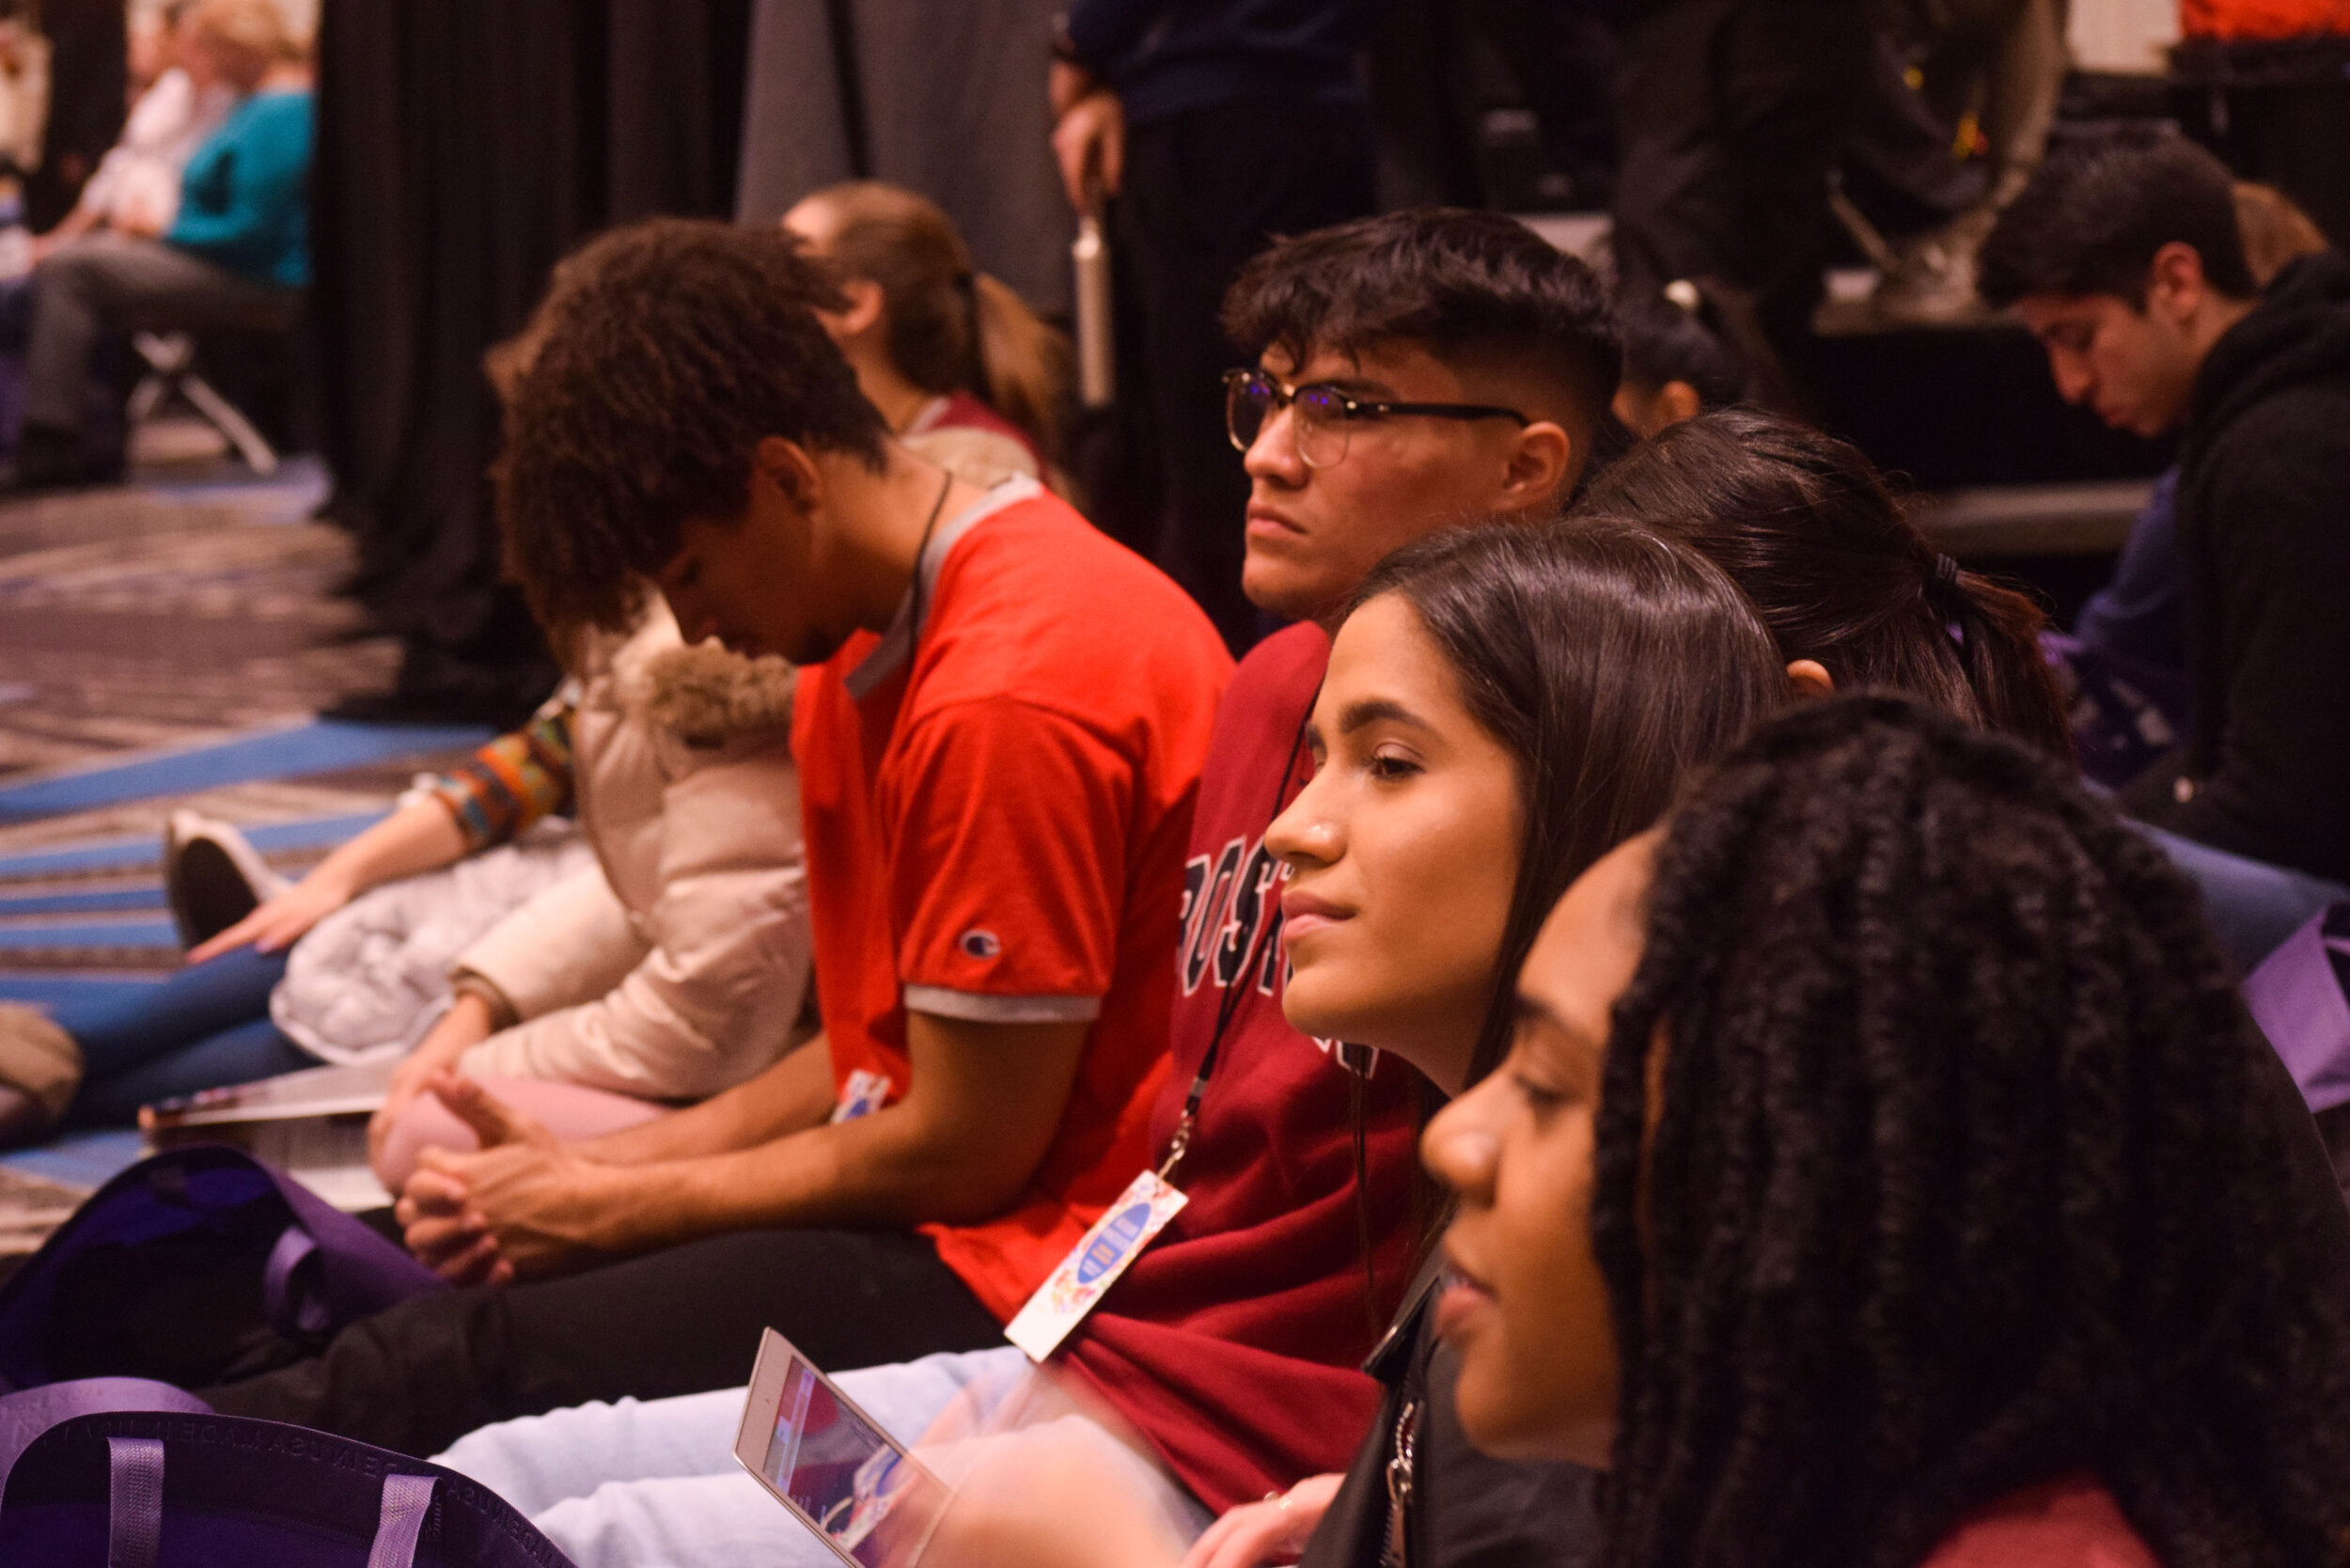  Students at the 2019 Ignatian Family Teach-In for Justice in Washington, D.C. reflect after listening to a keynote speaker. Each year, Jesuit high schools and colleges nationwide attend IFTJ to learn about social justice topics and the mission of th